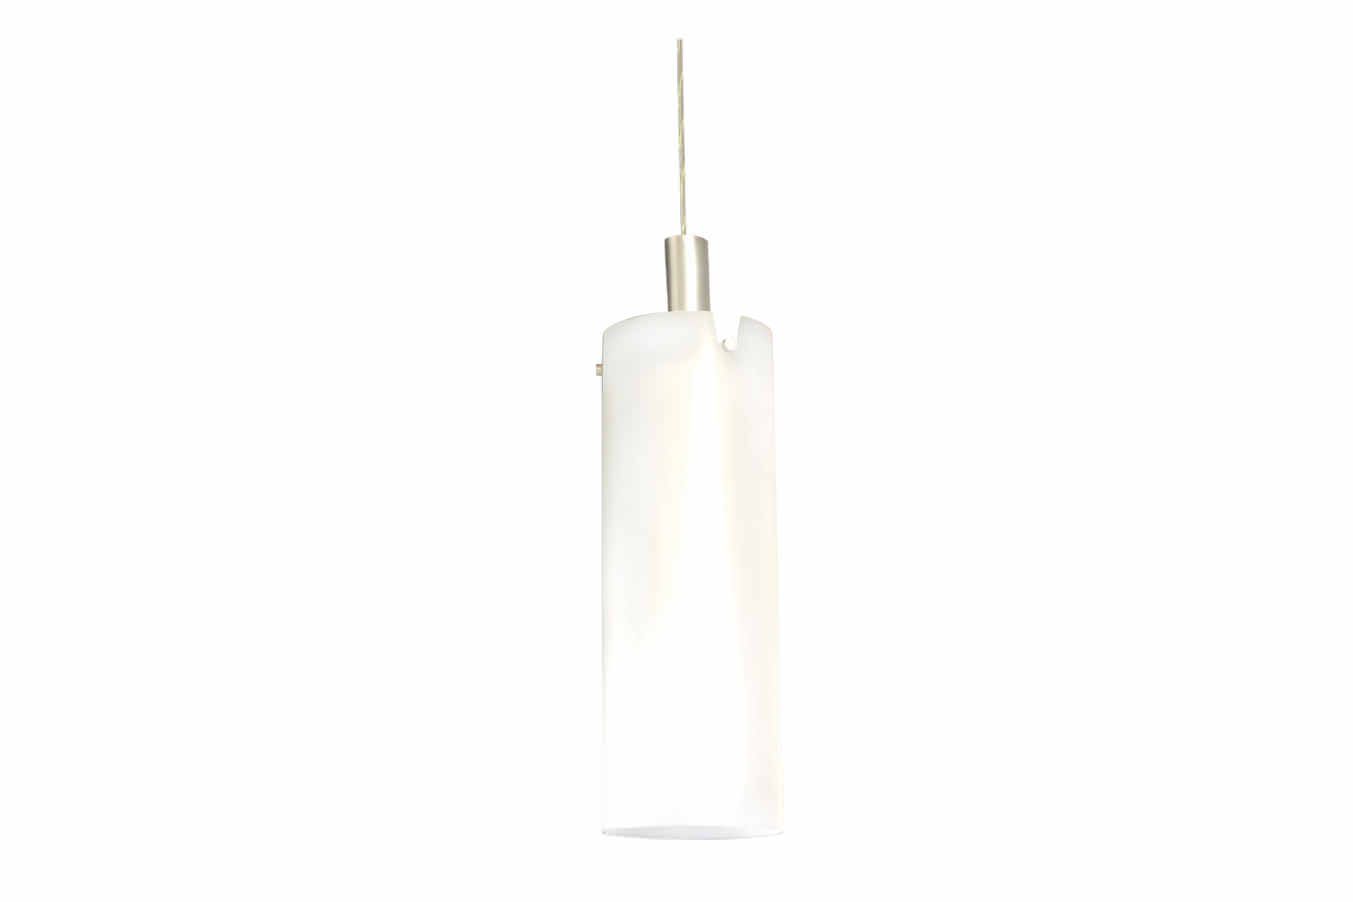 Ceiling-mounted lighting / for healthcare facilities ZAPP TUBE 200 Glamox Luxo